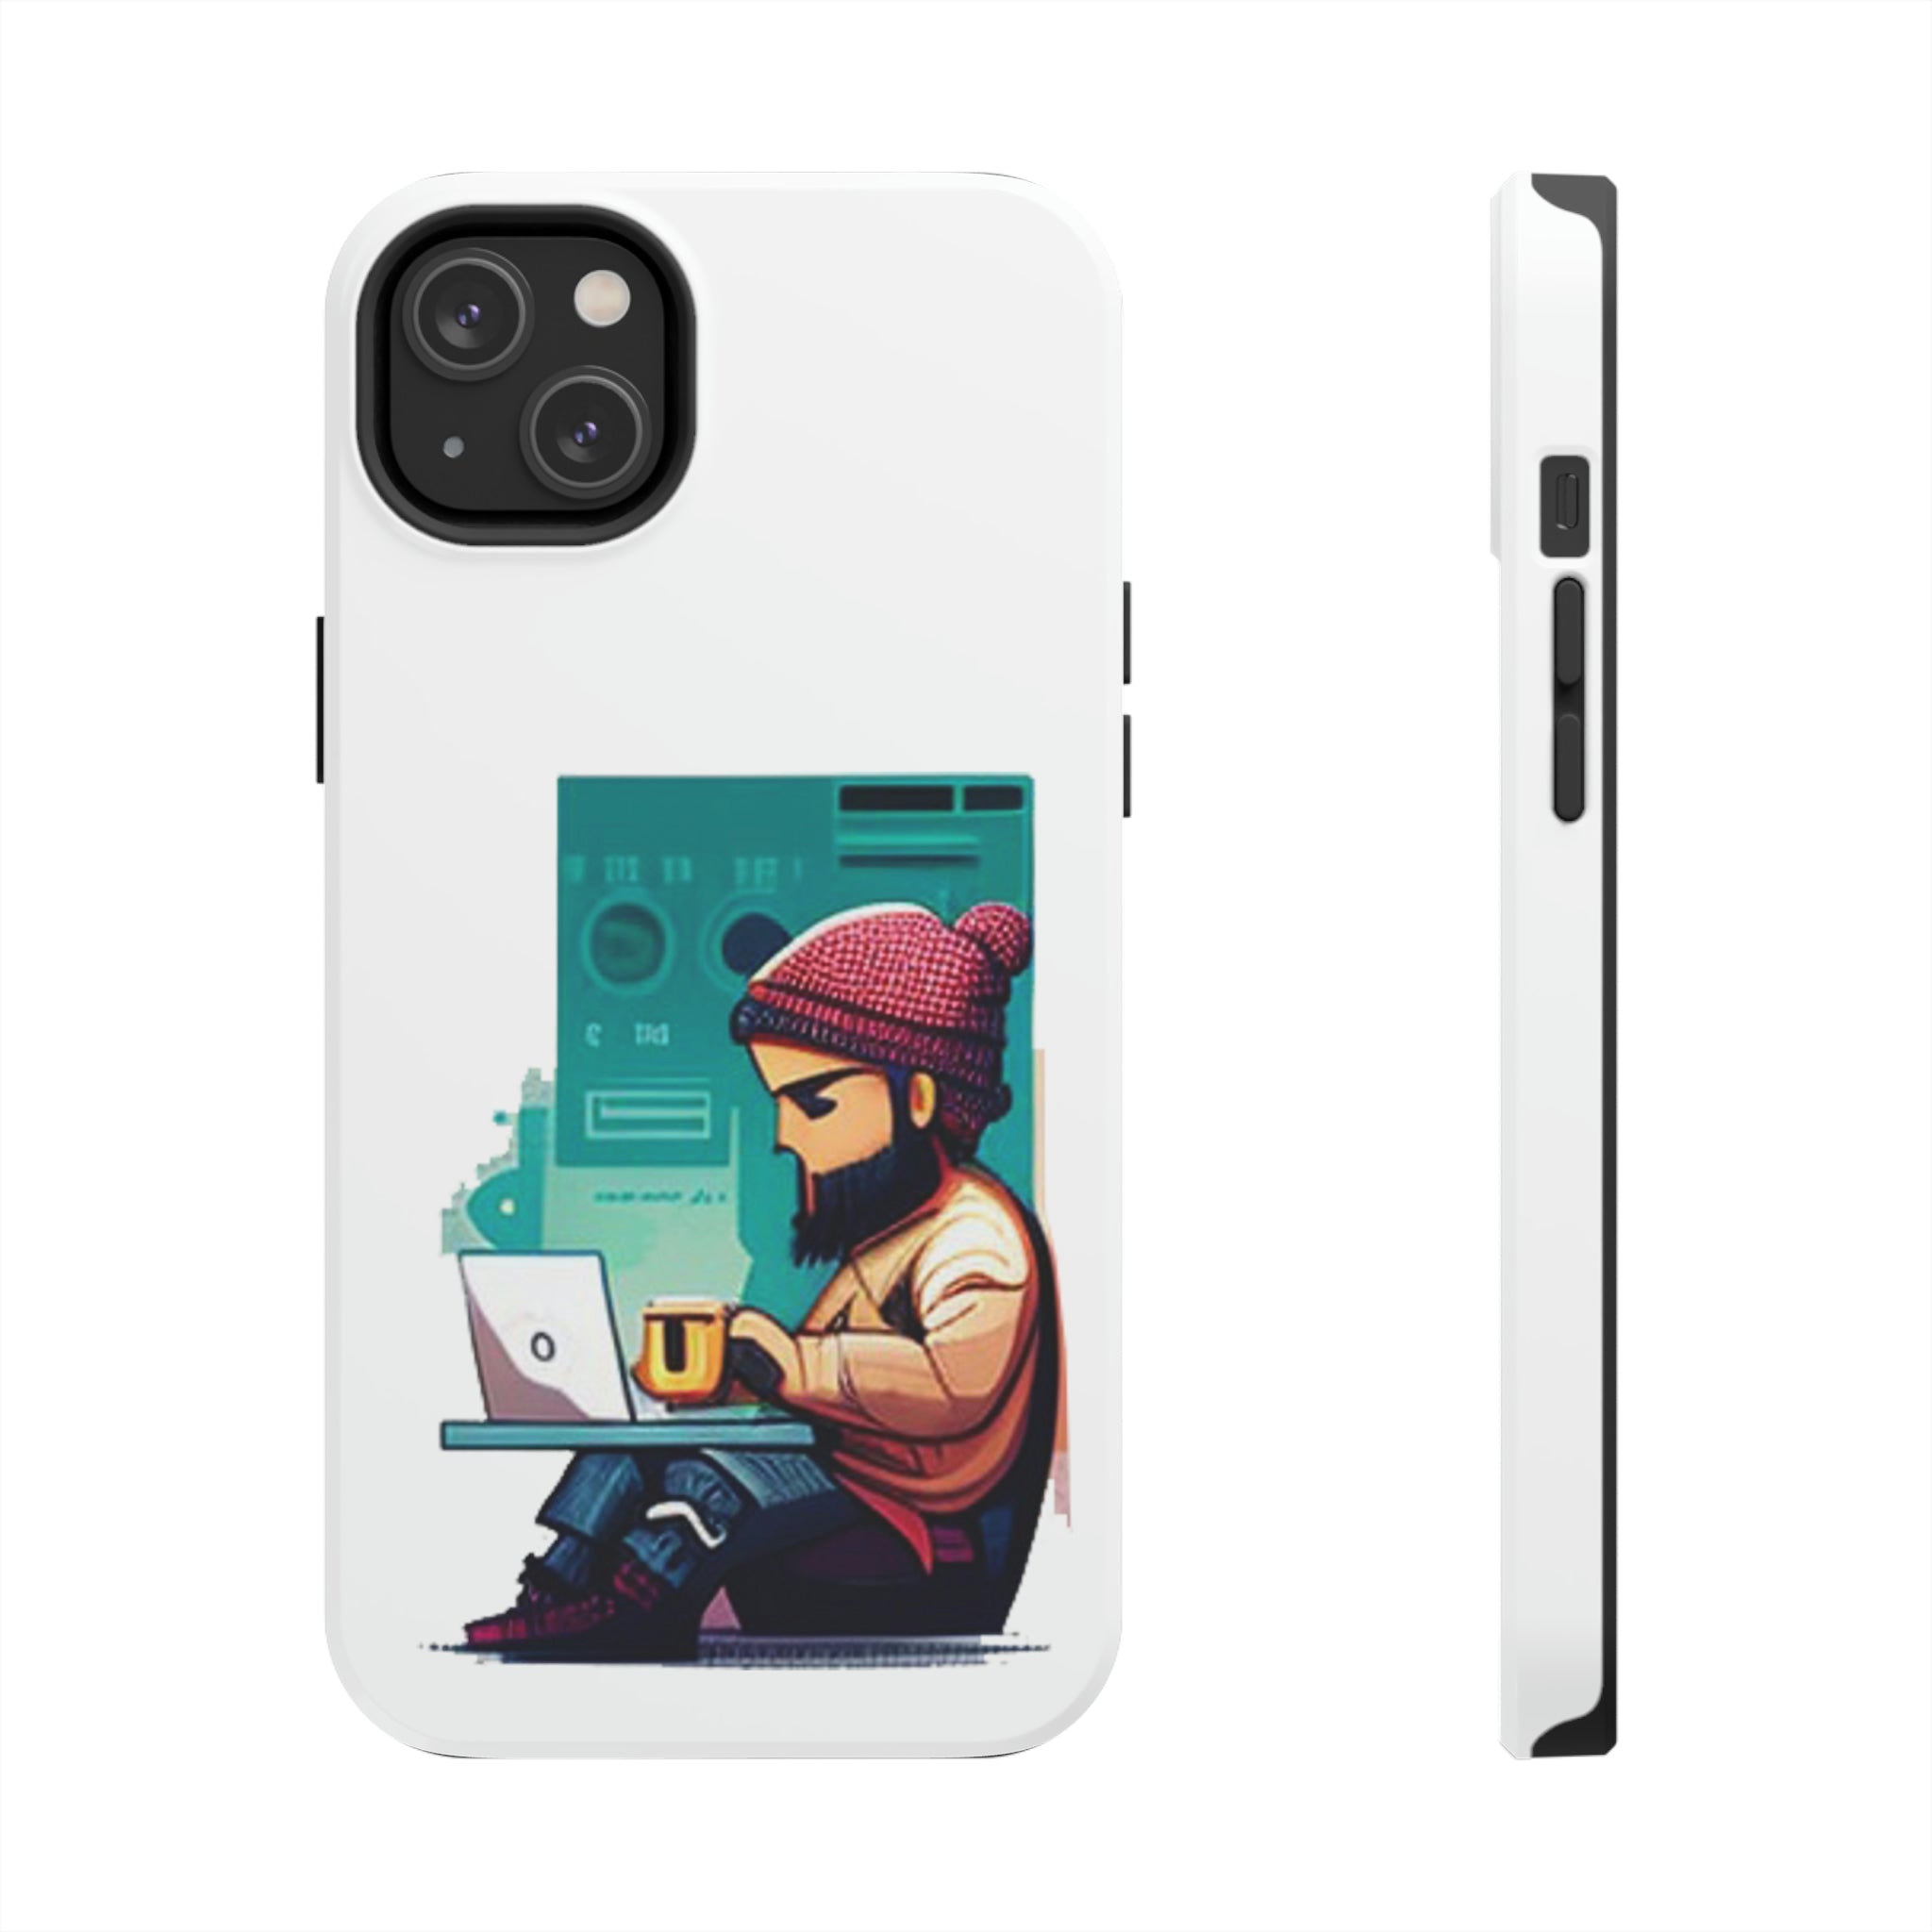 Couple Goals Guy Version Tough Phone Cases for iPhone